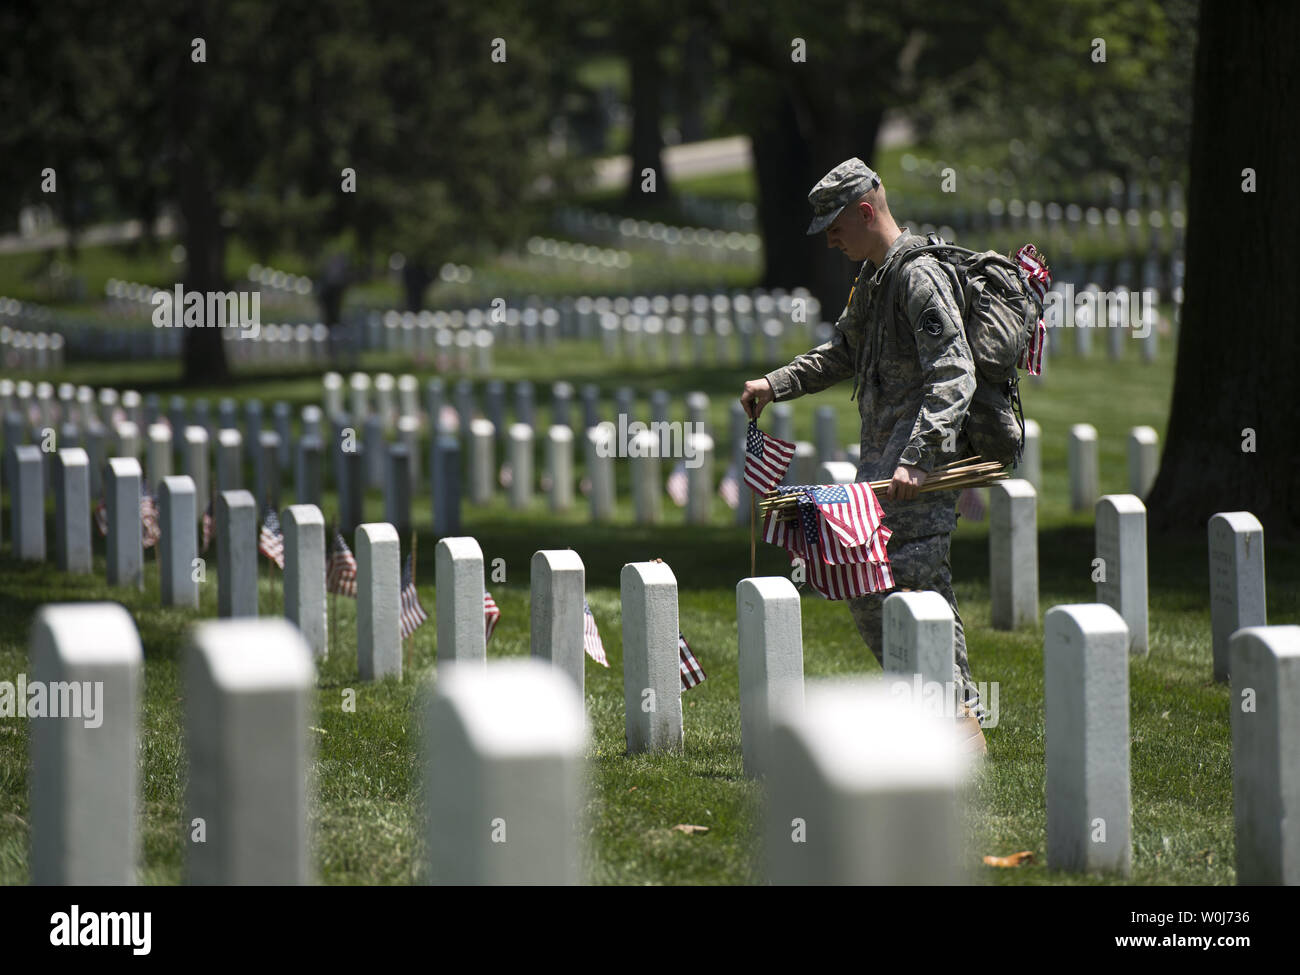 A soldier with the U.S. Army 3rd Infantry Regiment (Old Guard) places a flag at a grave marker as part of the annual Flags-In event for Memorial Day at Arlington National Cemetery in Arlington, Virginia on May 26, 2016. Members of The Old Guard placed an America flag at more than 230,000 grave markers at Arlington in honor of of Nation's fallen military members. The tradition has been conducted since 1948. Photo by Kevin Dietsch/UPI Stock Photo